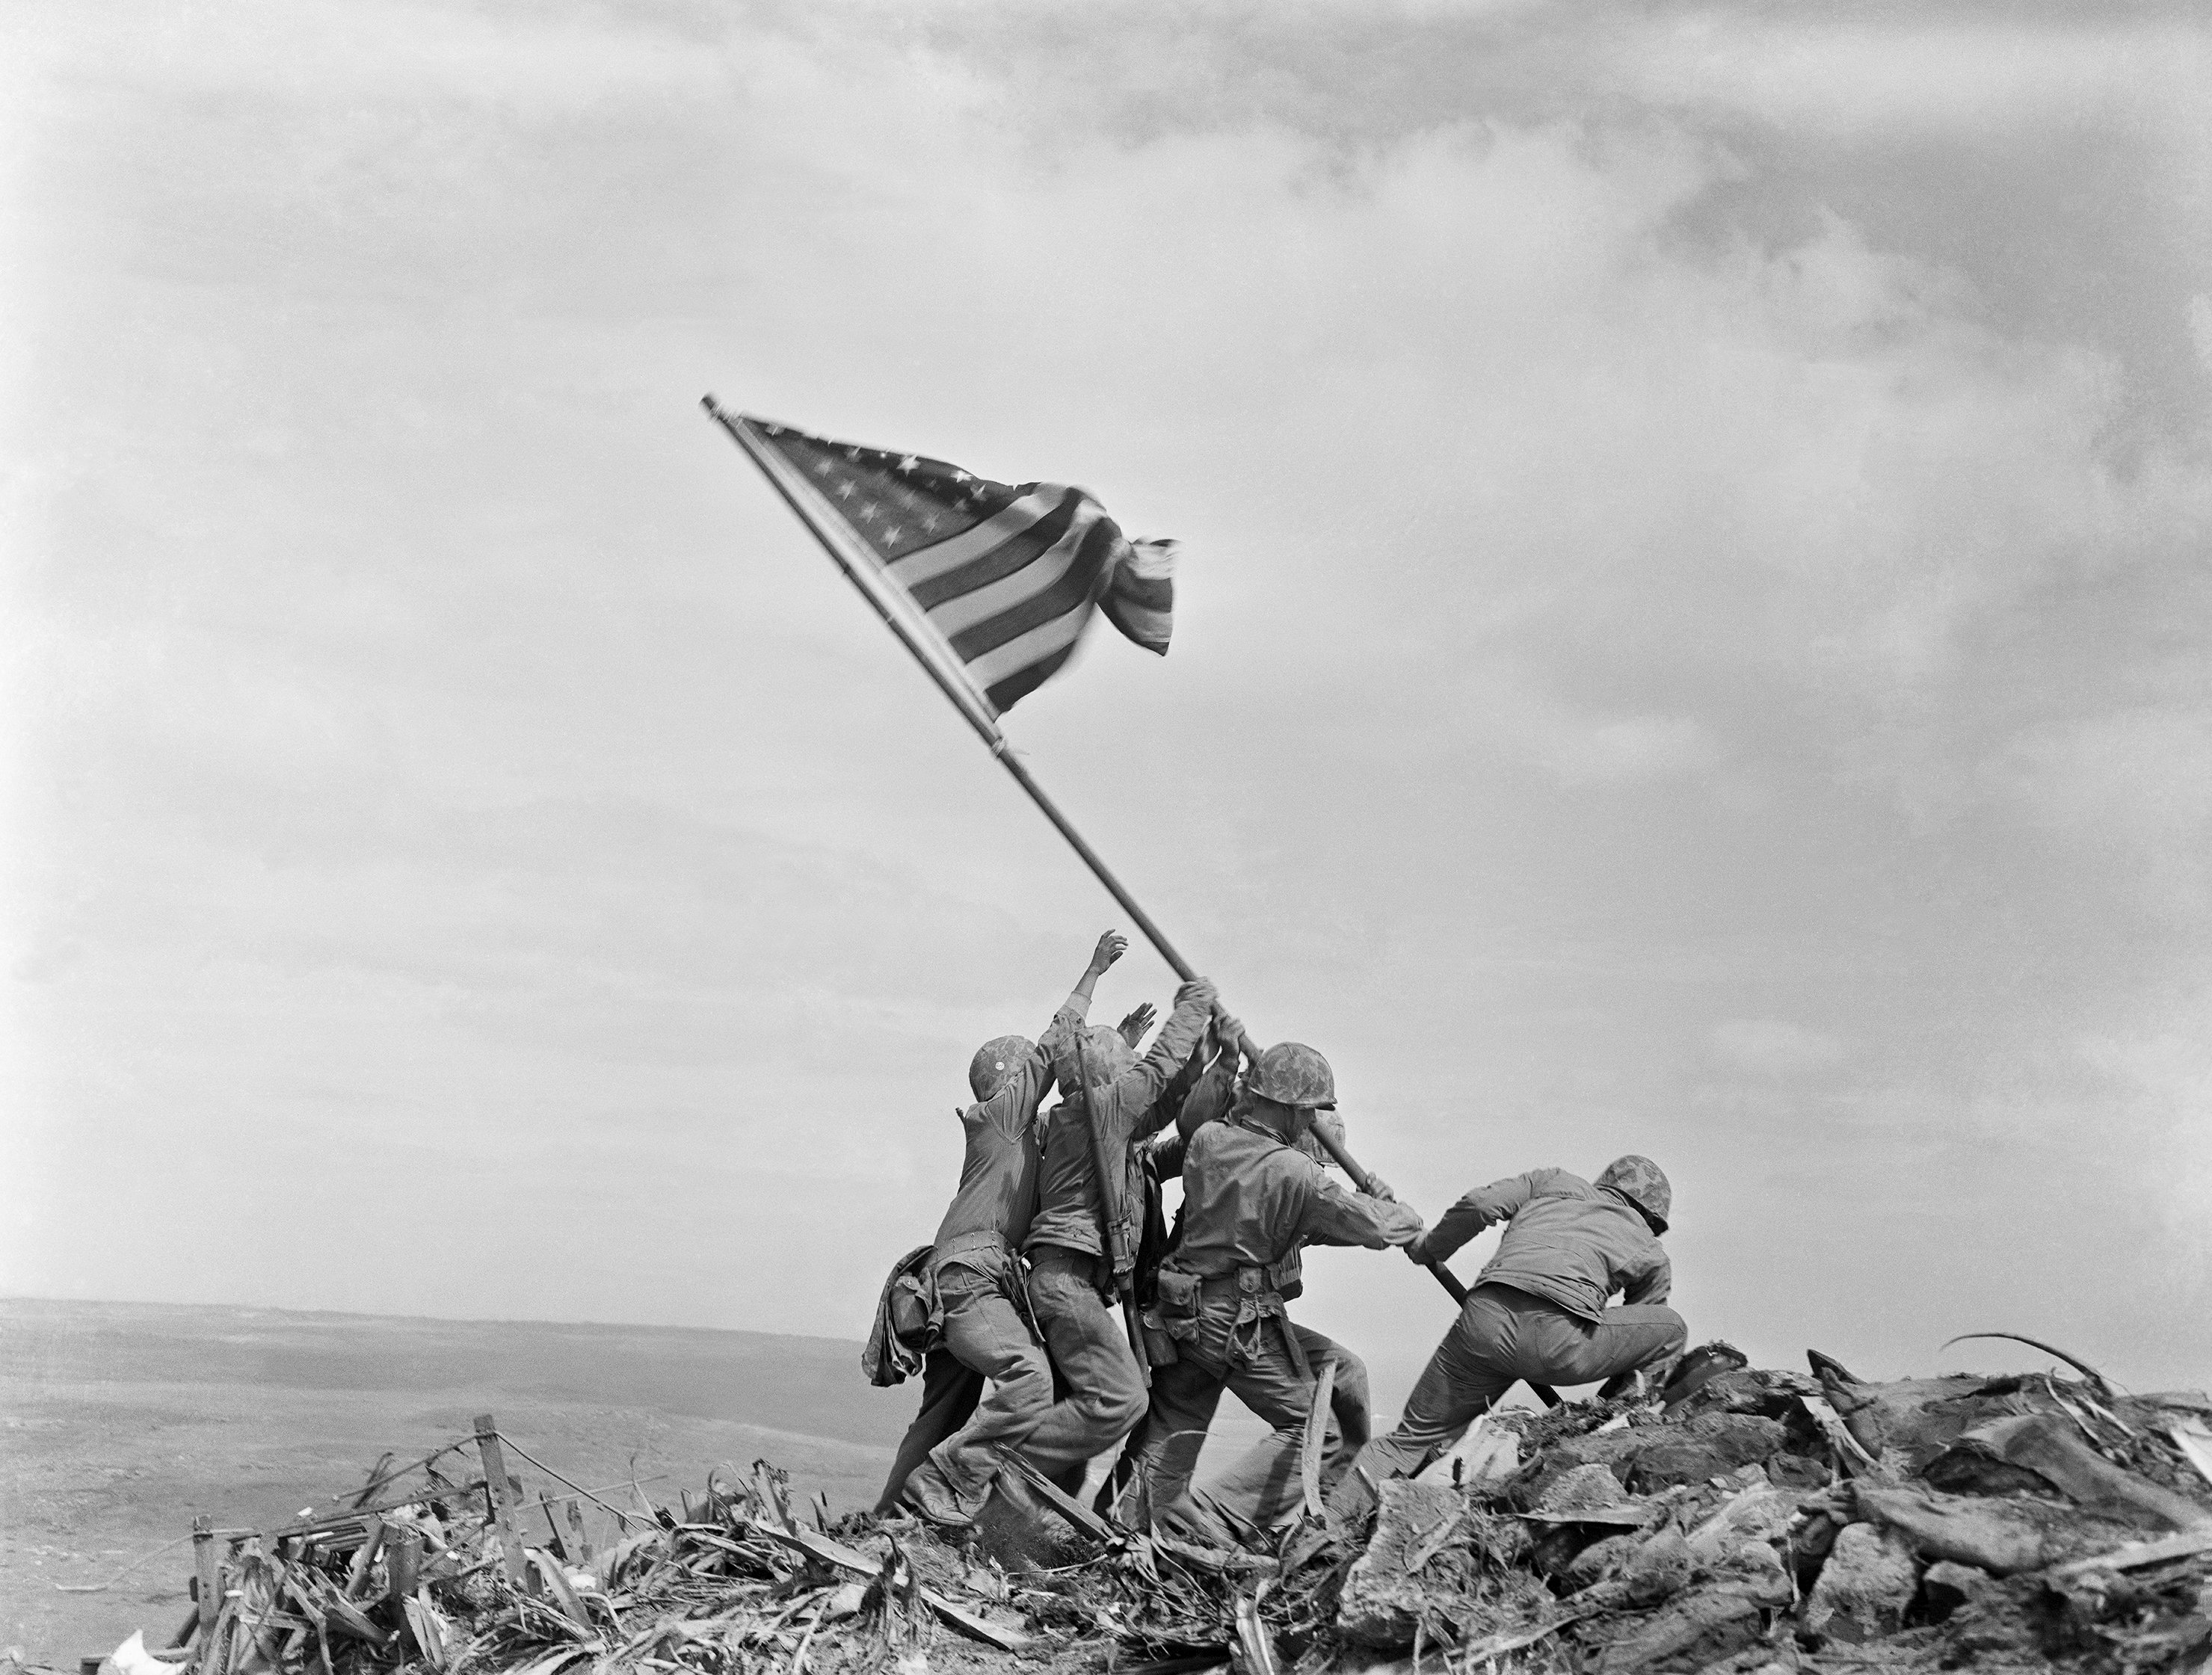 One of the Marines in Iconic Iwo Jima Photo Misidentified for Over 70 Years